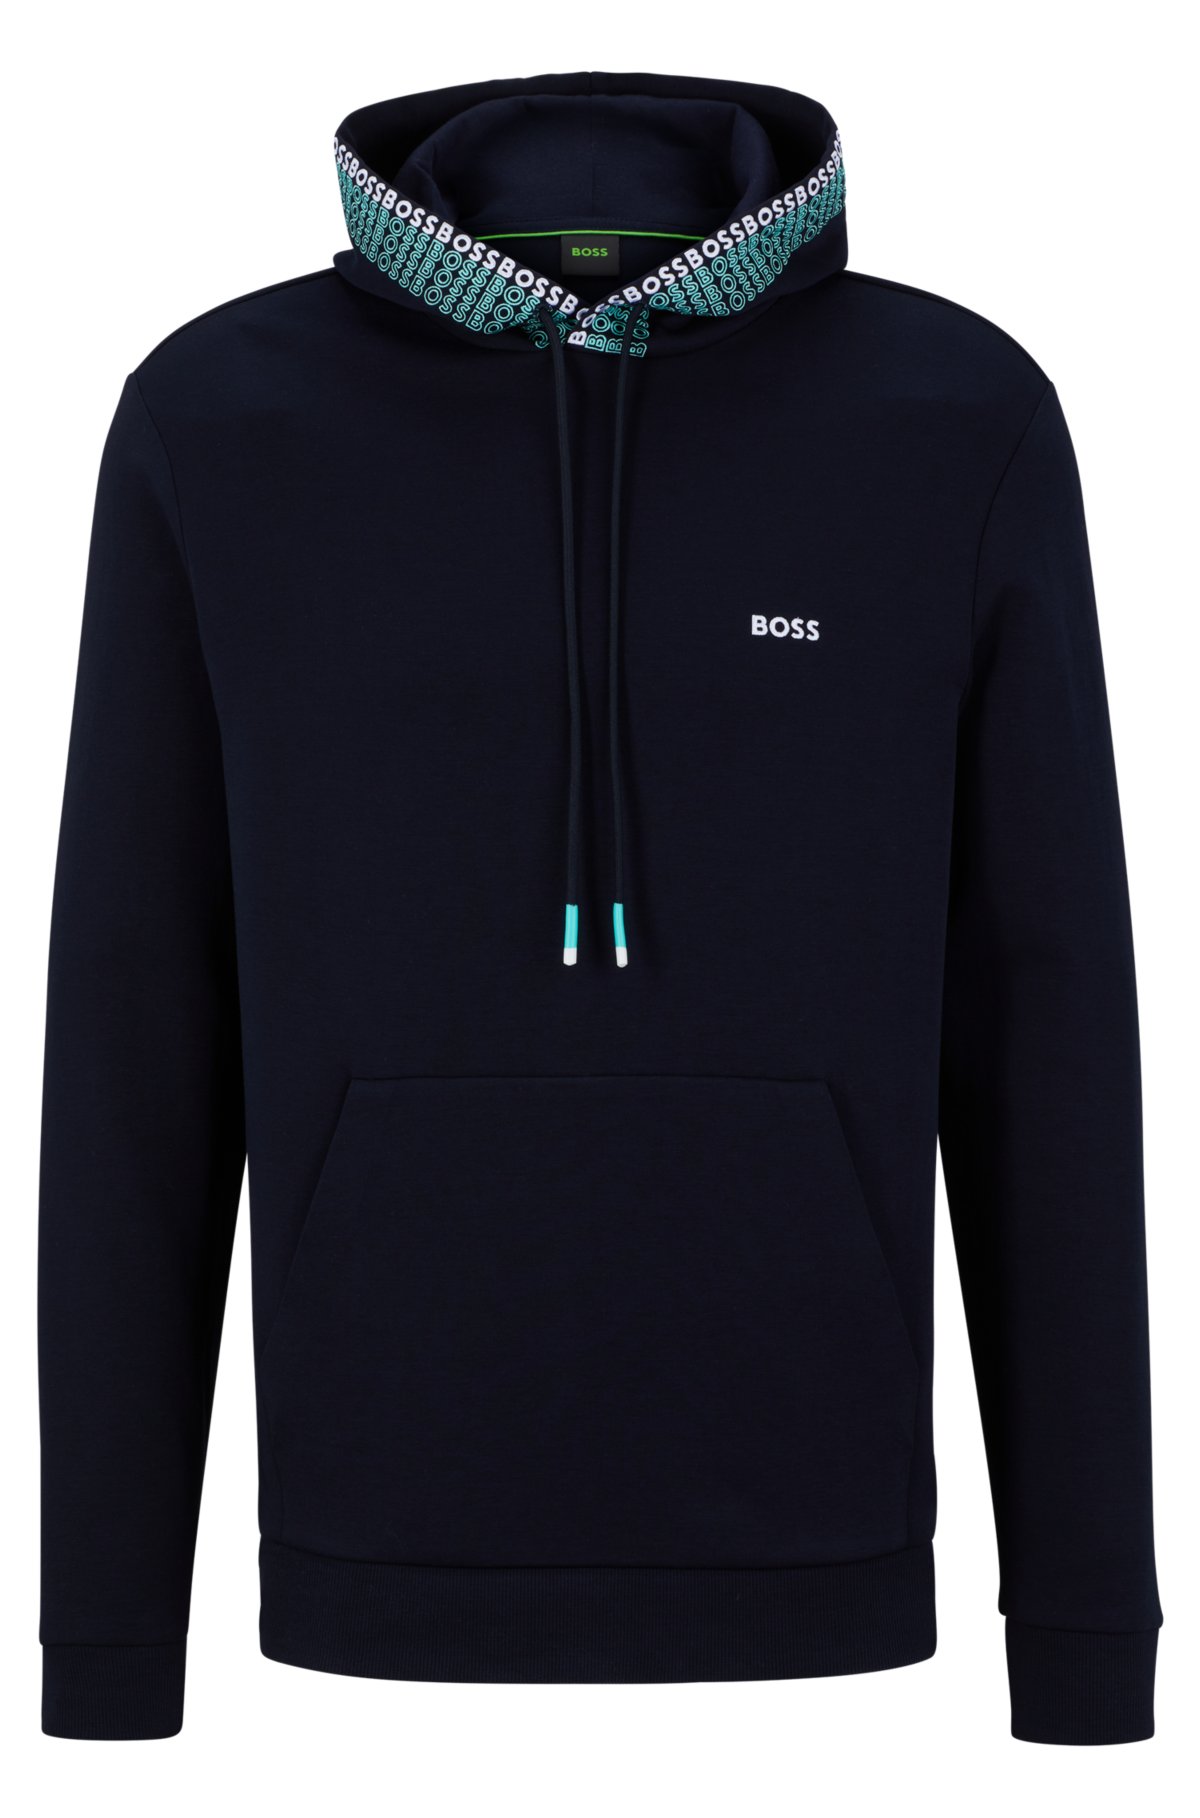 Relaxed Graphic Piping Po Hoodie - Multi Colour